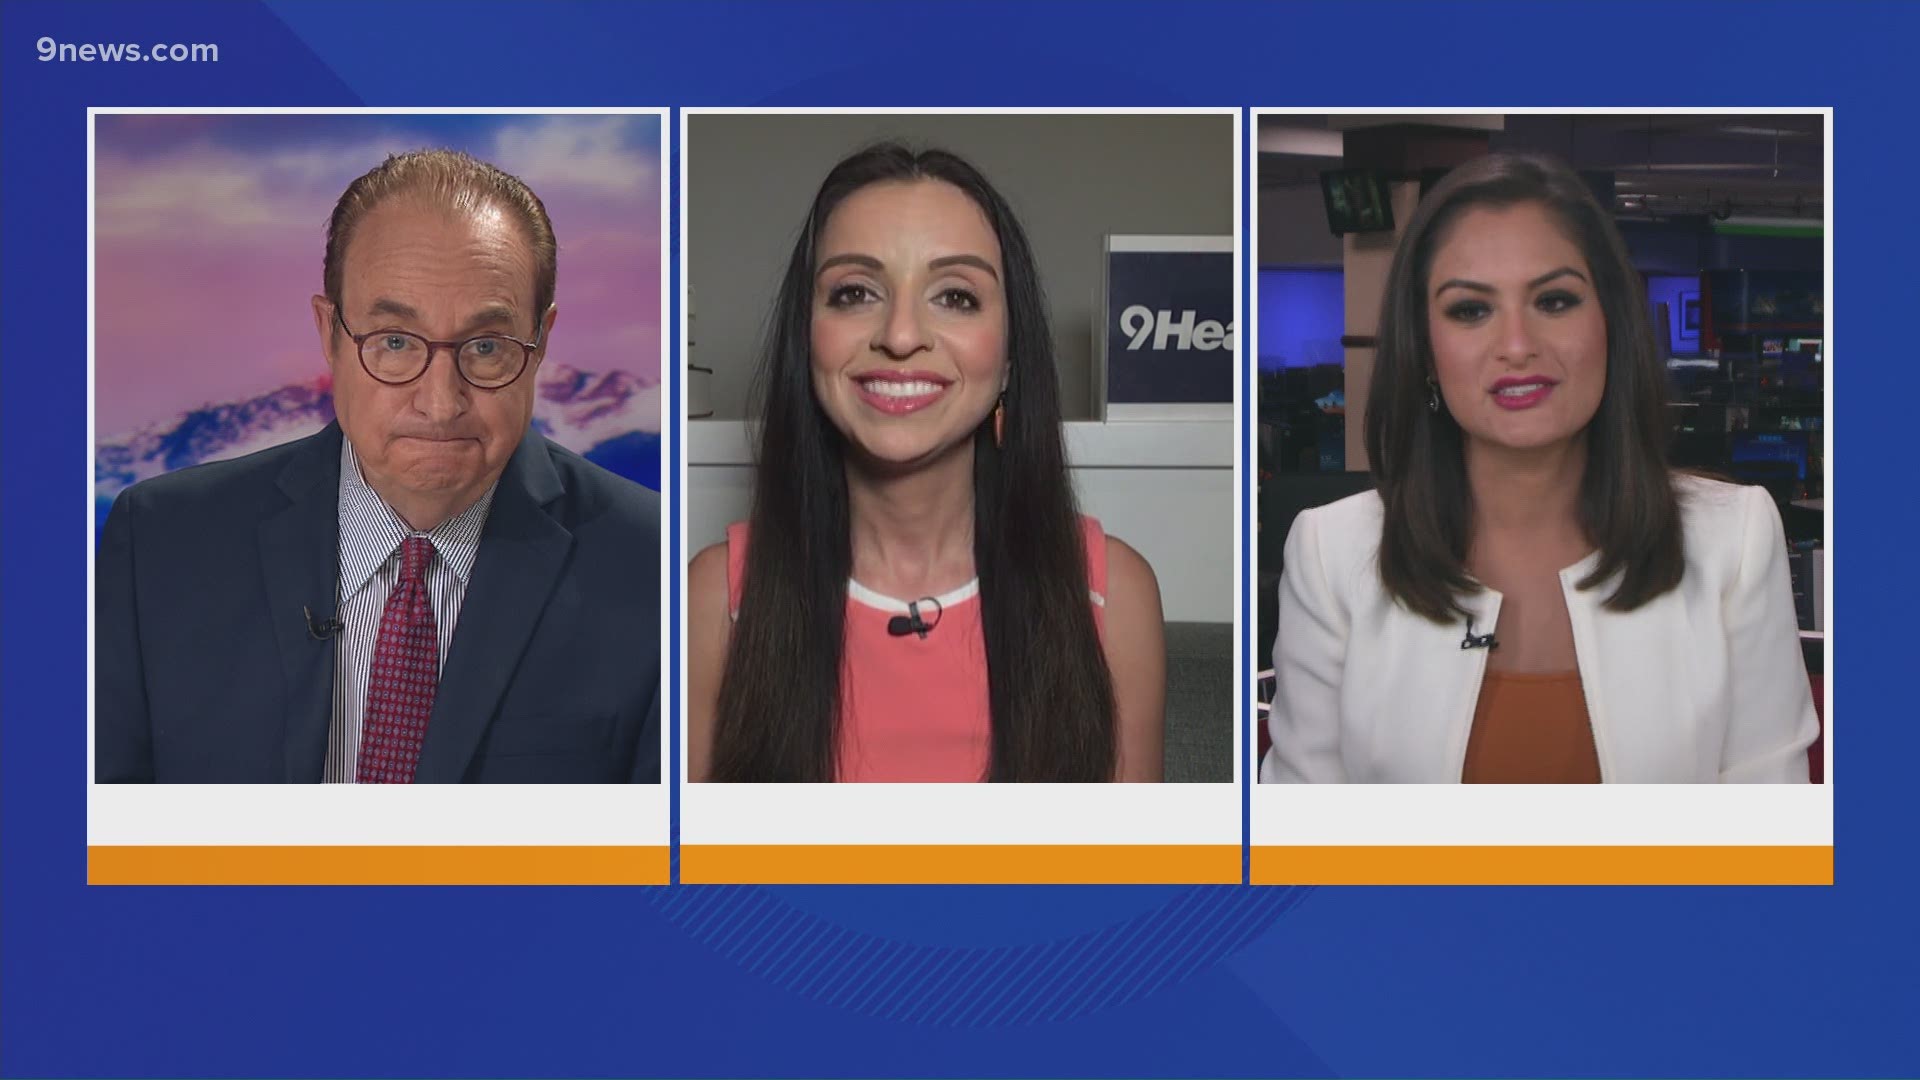 9Health Expert, Dr. Payal Kohli, talks about the risk factors that put President Trump in a higher risk category after he tests positive for COVID-19.